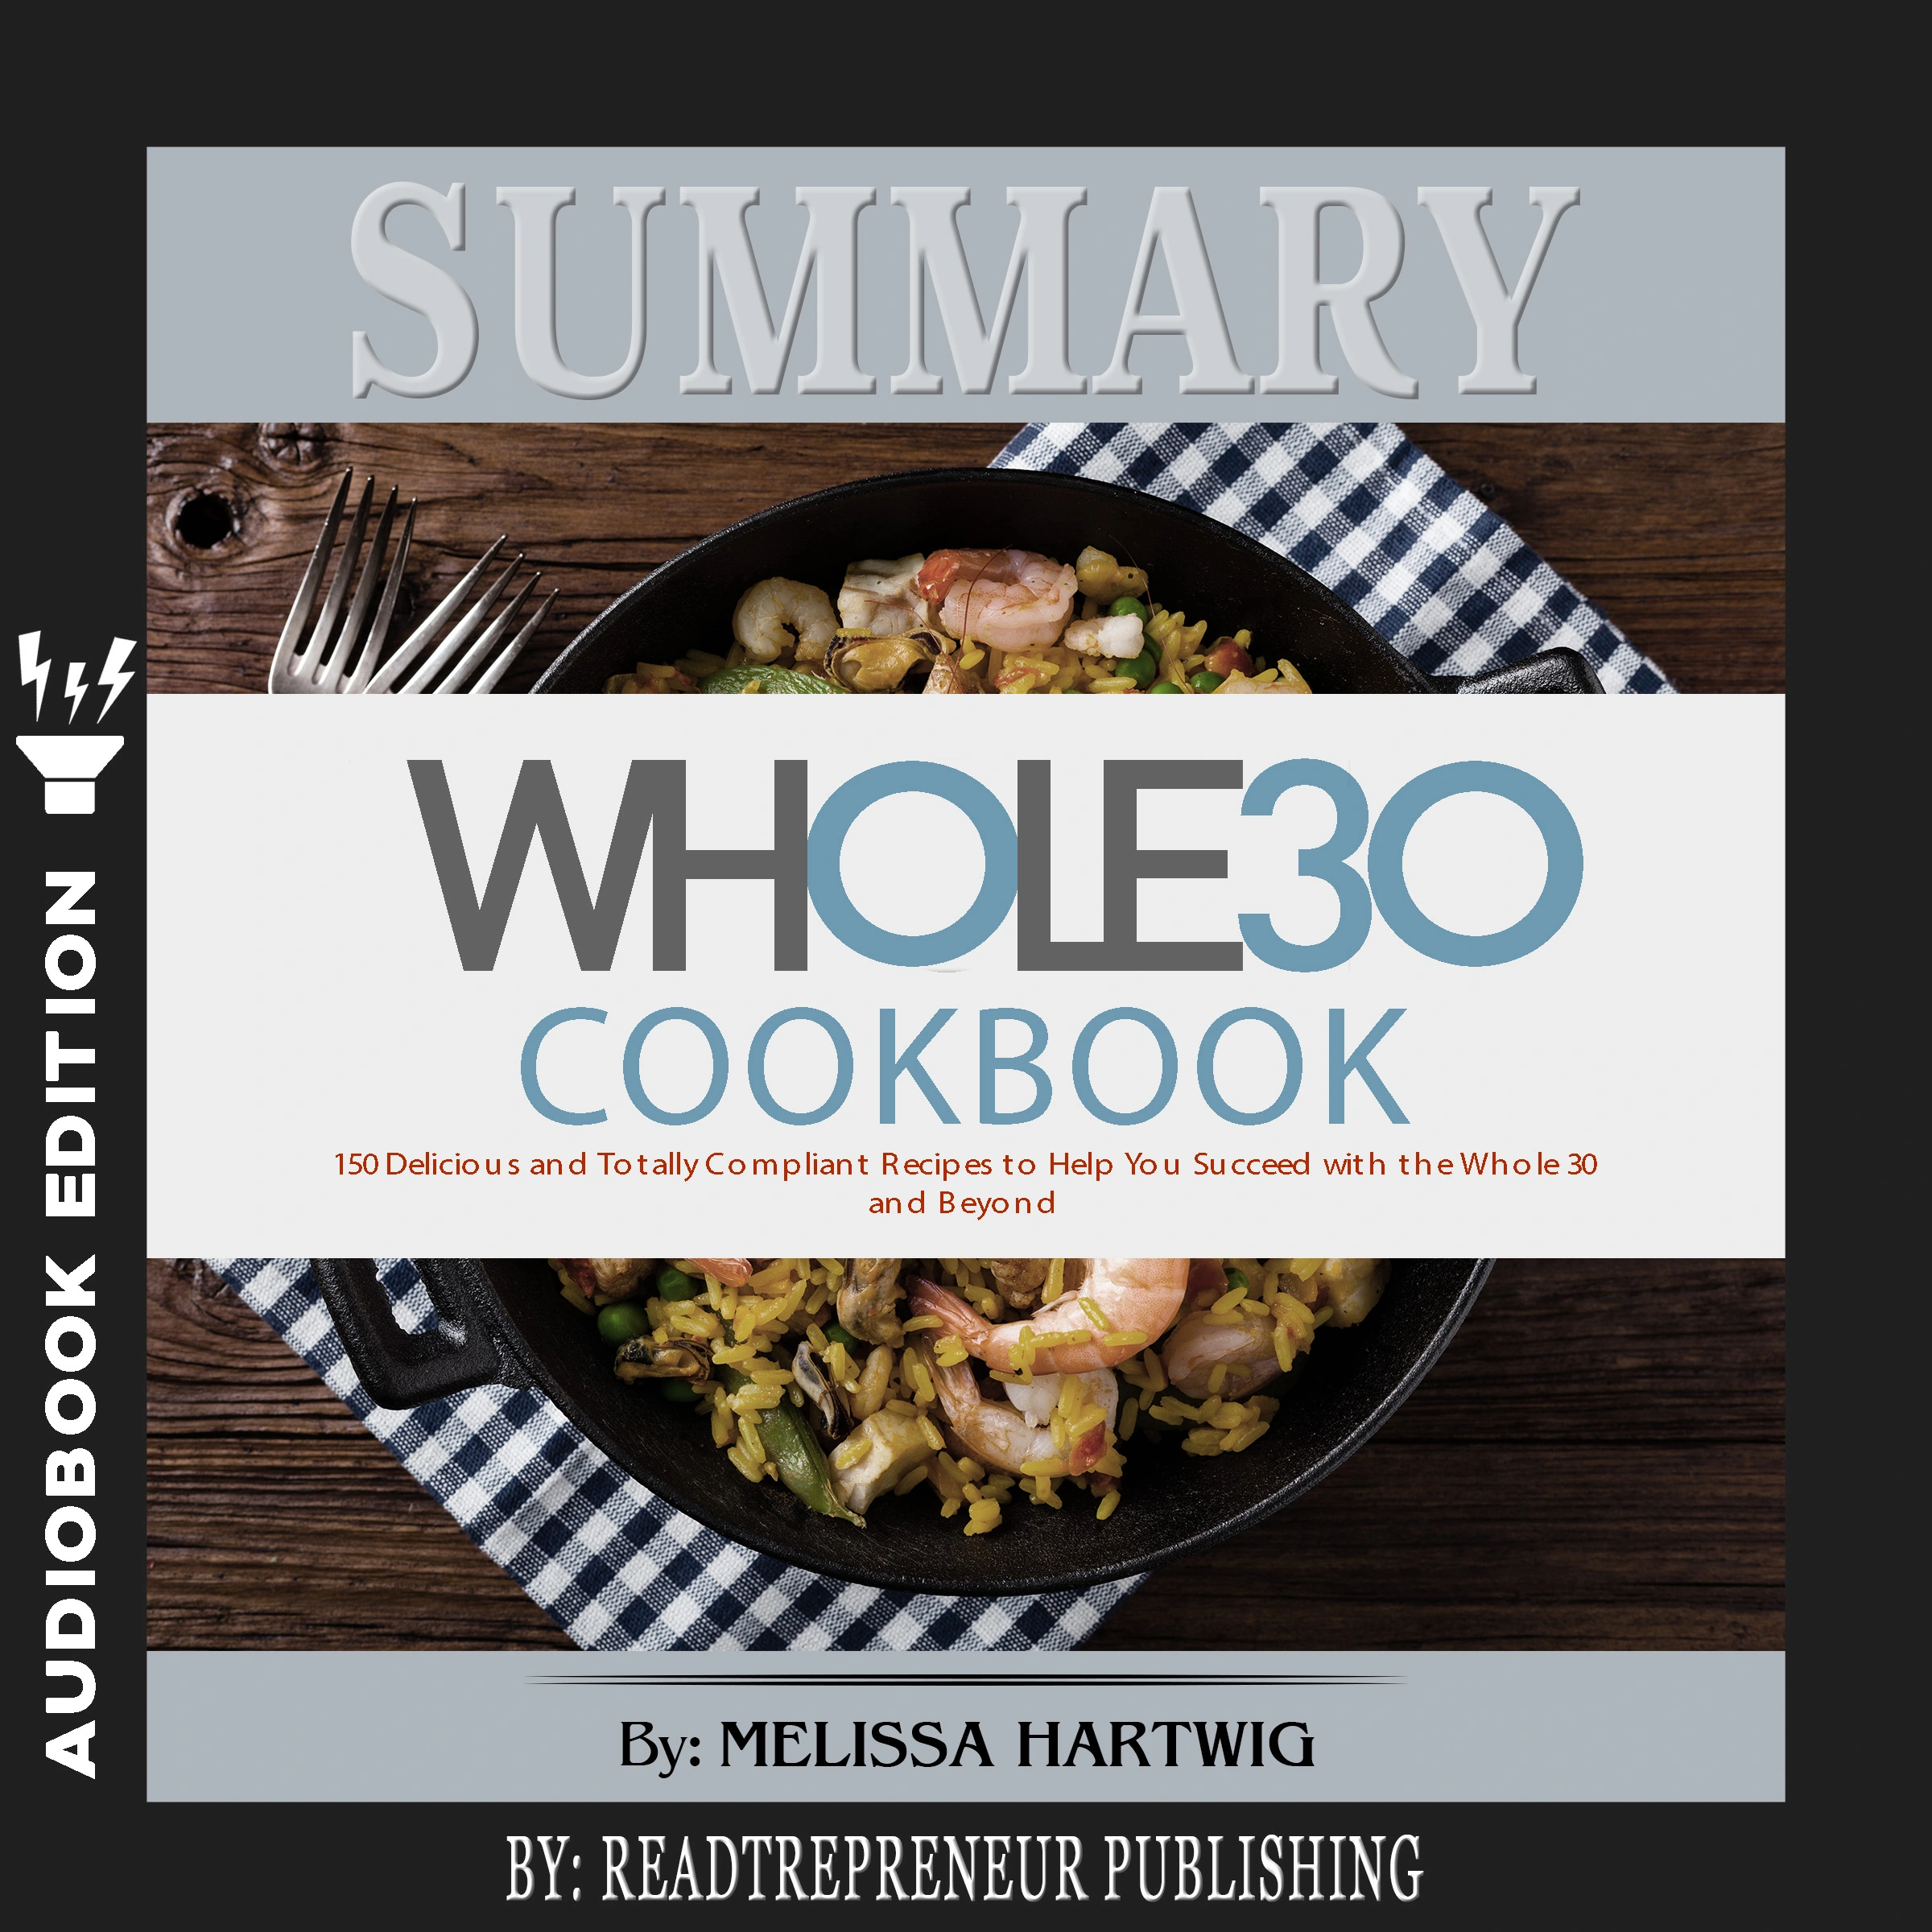 Summary of The Whole30 Cookbook: The 30-Day Guide to Total Health and Food Freedom by Melissa Hartwig and Dallas Hartwig Audiobook by Readtrepreneur Publishing